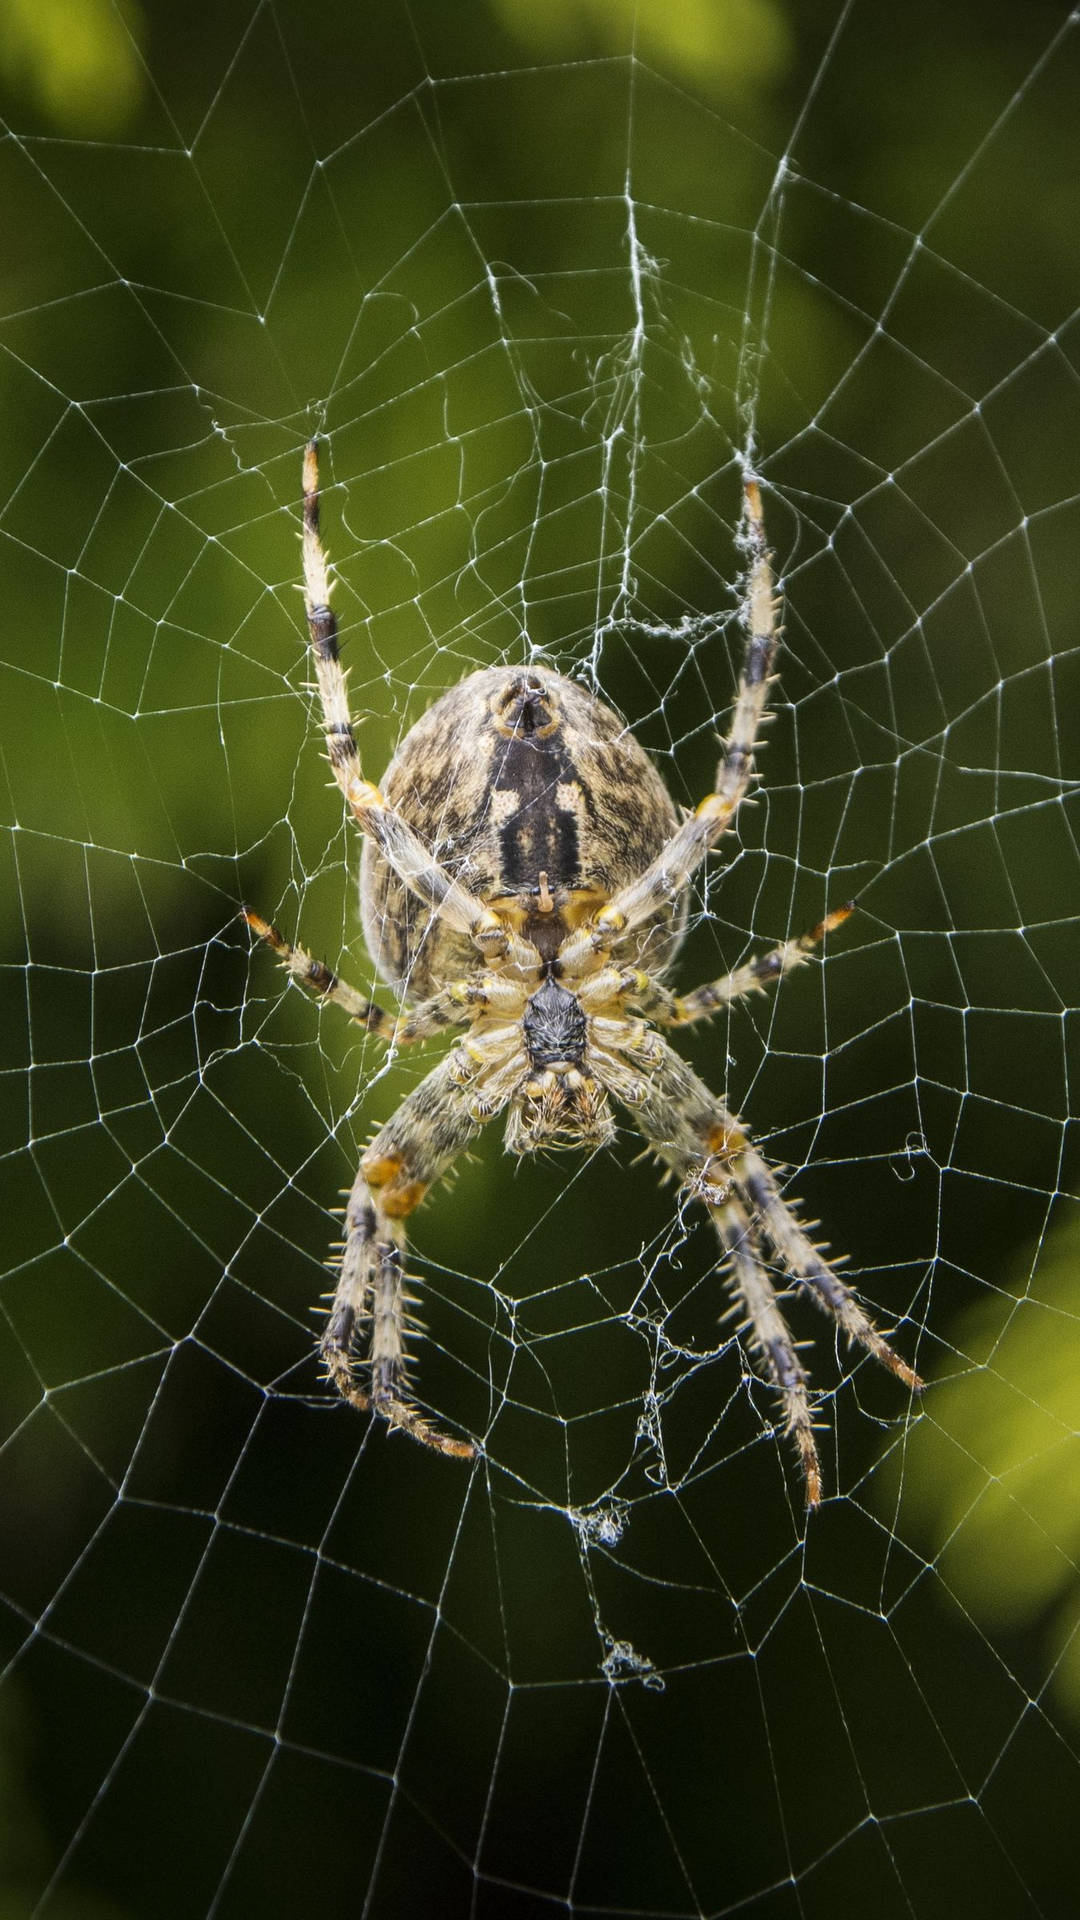 Spider With Intricate Web